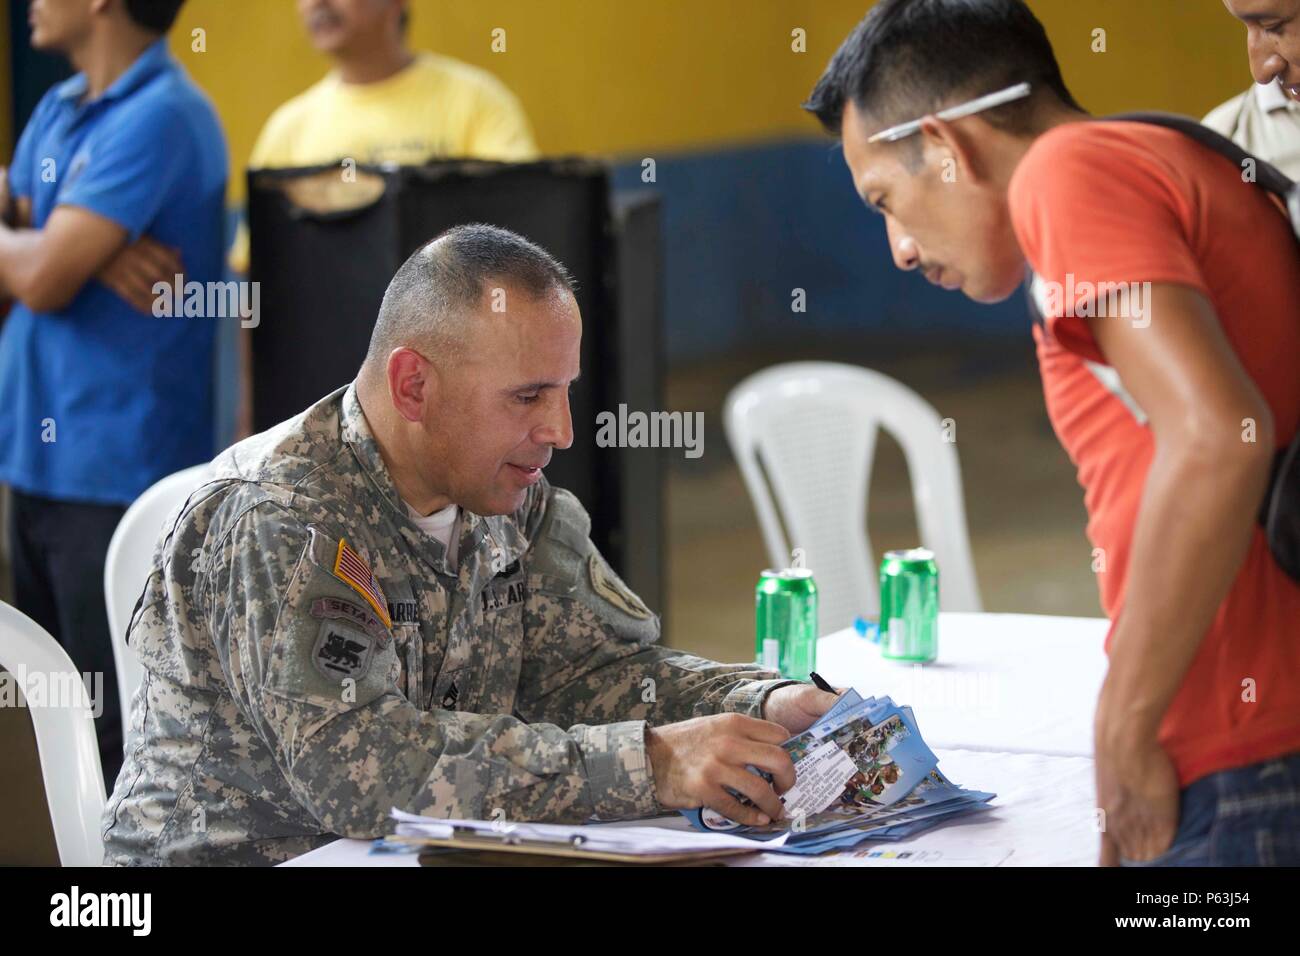 U.S. Army Sgt. 1st Class Luis Villarreal from the 345th Psychological Operations Company hands out flyers to advertise the future Medical Readiness Exercise to the local Cocodes as part of the Beyond The Horizon Operation at San Pablo, Guatemala, April 29, 2016. Task Force Red Wolf and Army South conducts Humanitarian Civil Assistance Training to include tactical level construction projects and Medical Readiness Training Exercises providing medical access and building schools in Guatemala with the Guatemalan Government and non-government agencies from 05MAR16 to 18JUN16 in order to improve the Stock Photo